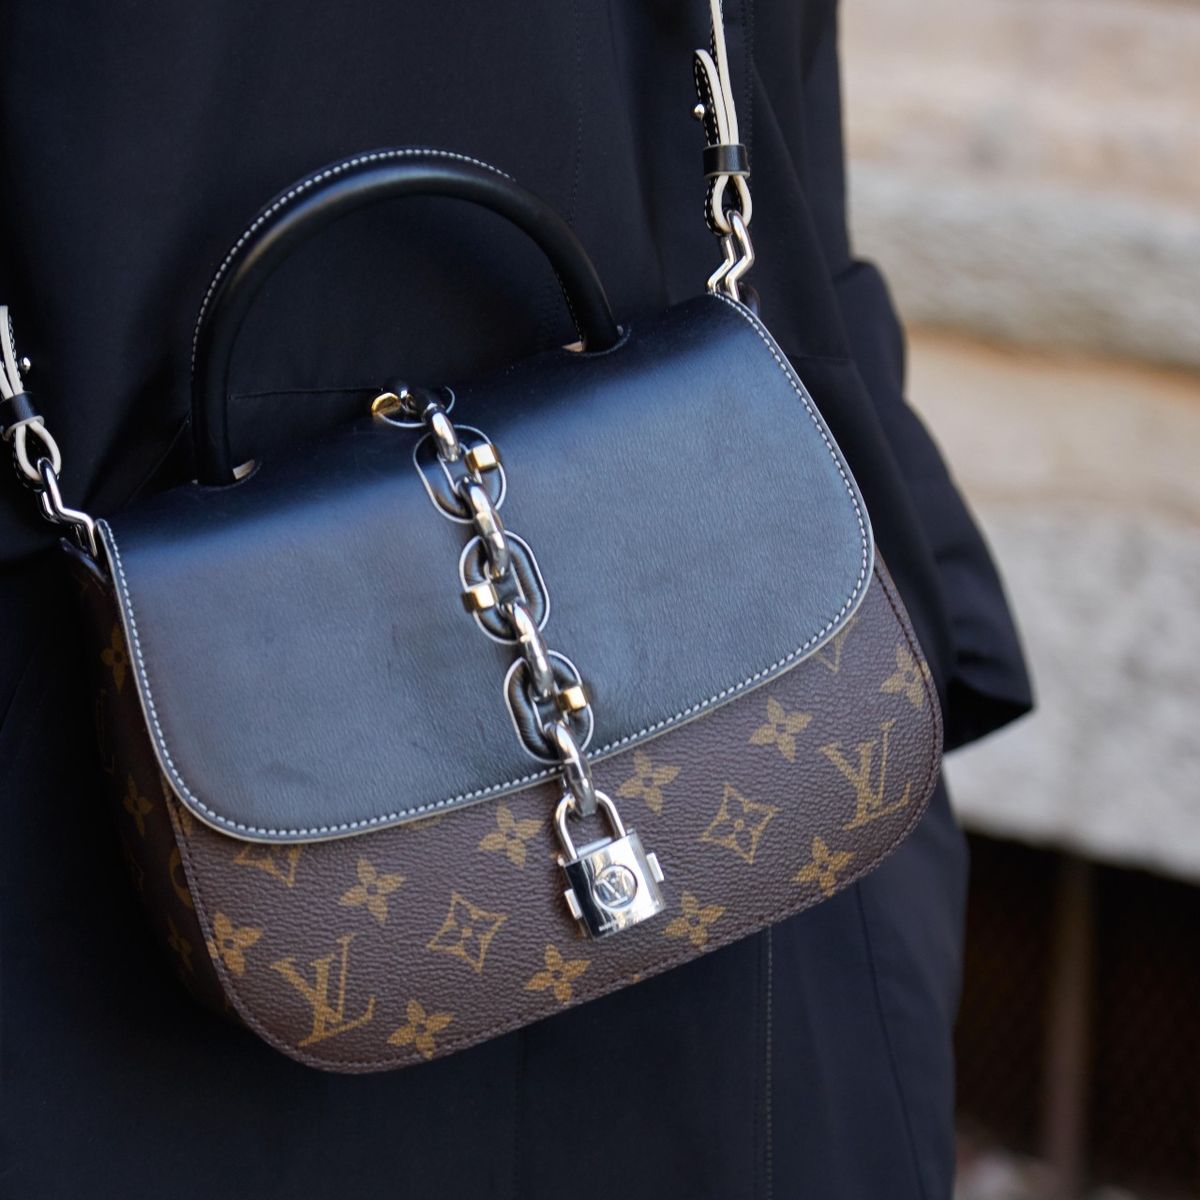 A Five-Step Guide to Choosing Your First Designer Bag - The Relux